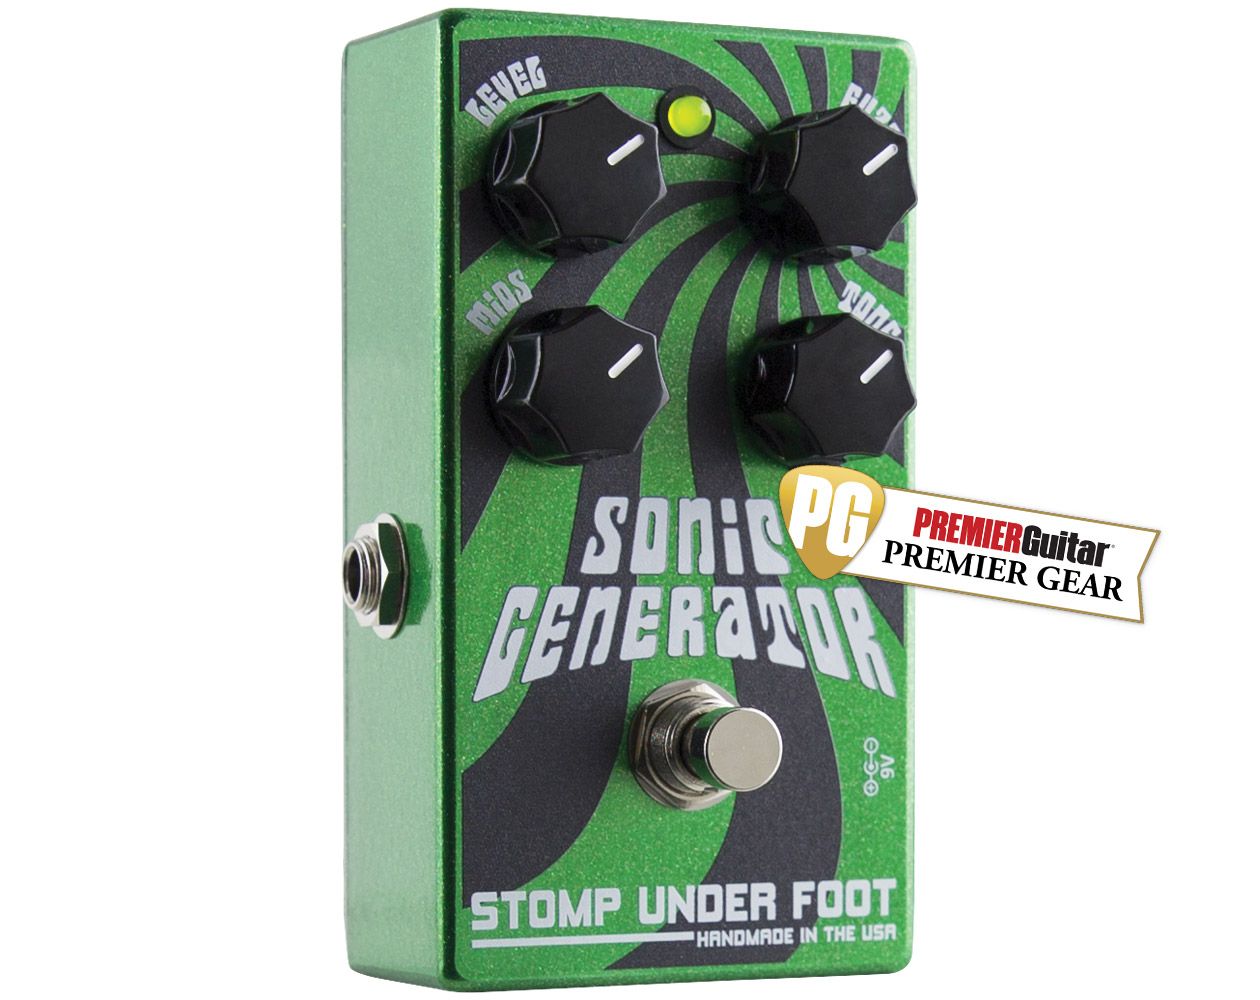 Stomp Under Foot Sonic Generator Review